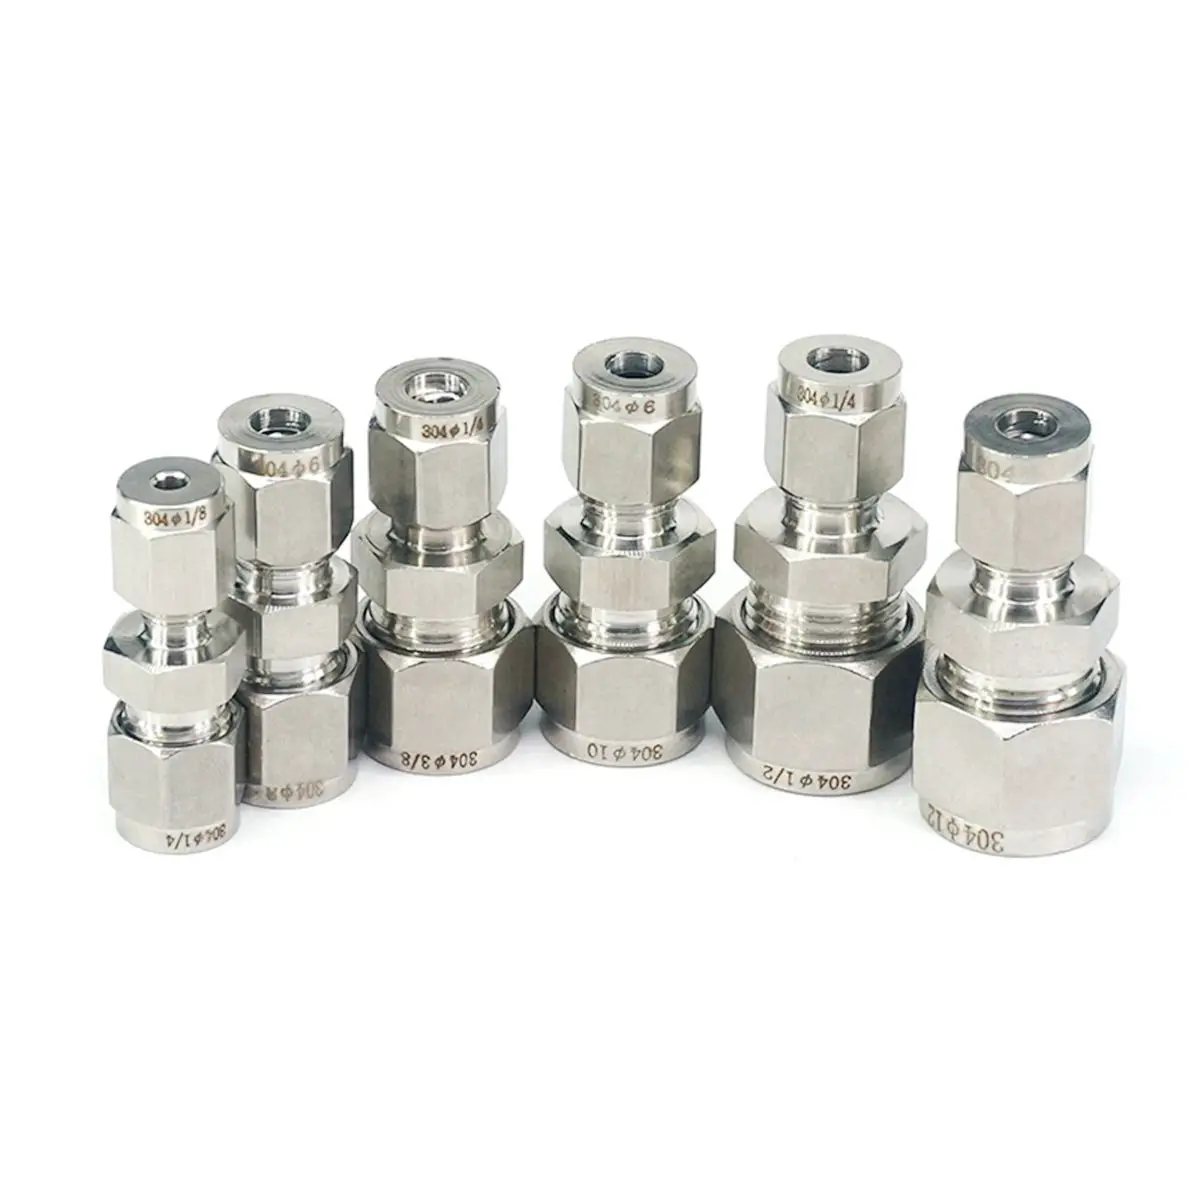 

Fit Tube O/D 3-16mm 1/8" 1/4" 3/8" 1/2" 304 Stainless Steel Reducer Sleeve Ferrule Pneumatic Air Connector Adapter